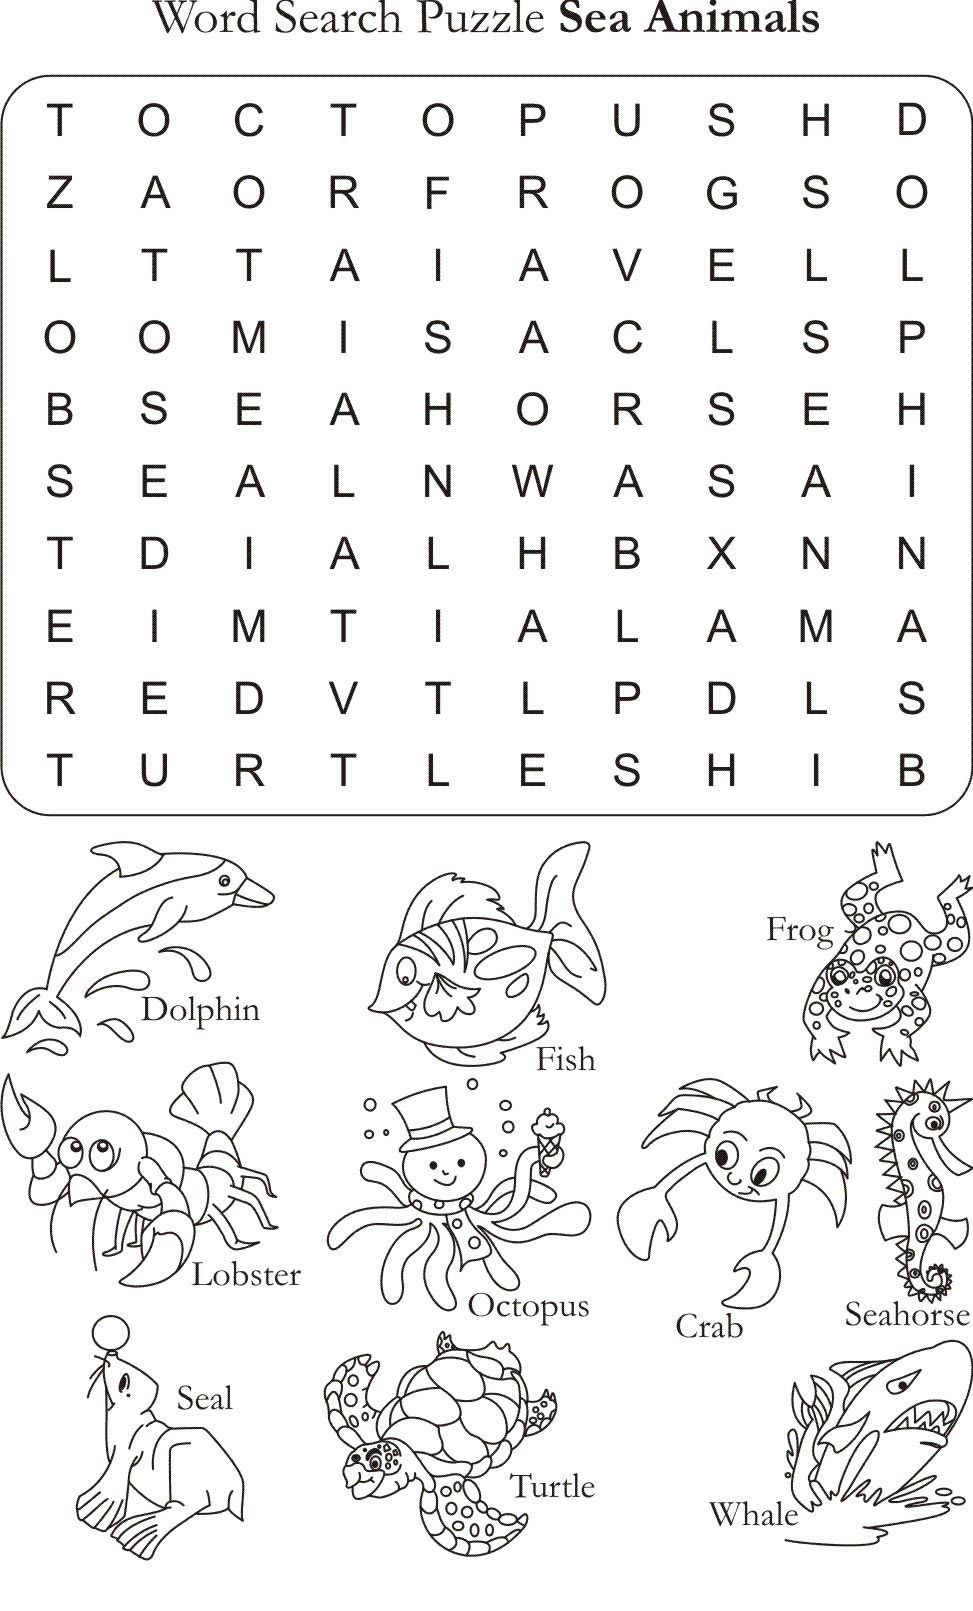 Word Search Puzzle Sea Animals | English Worksheets For Kids